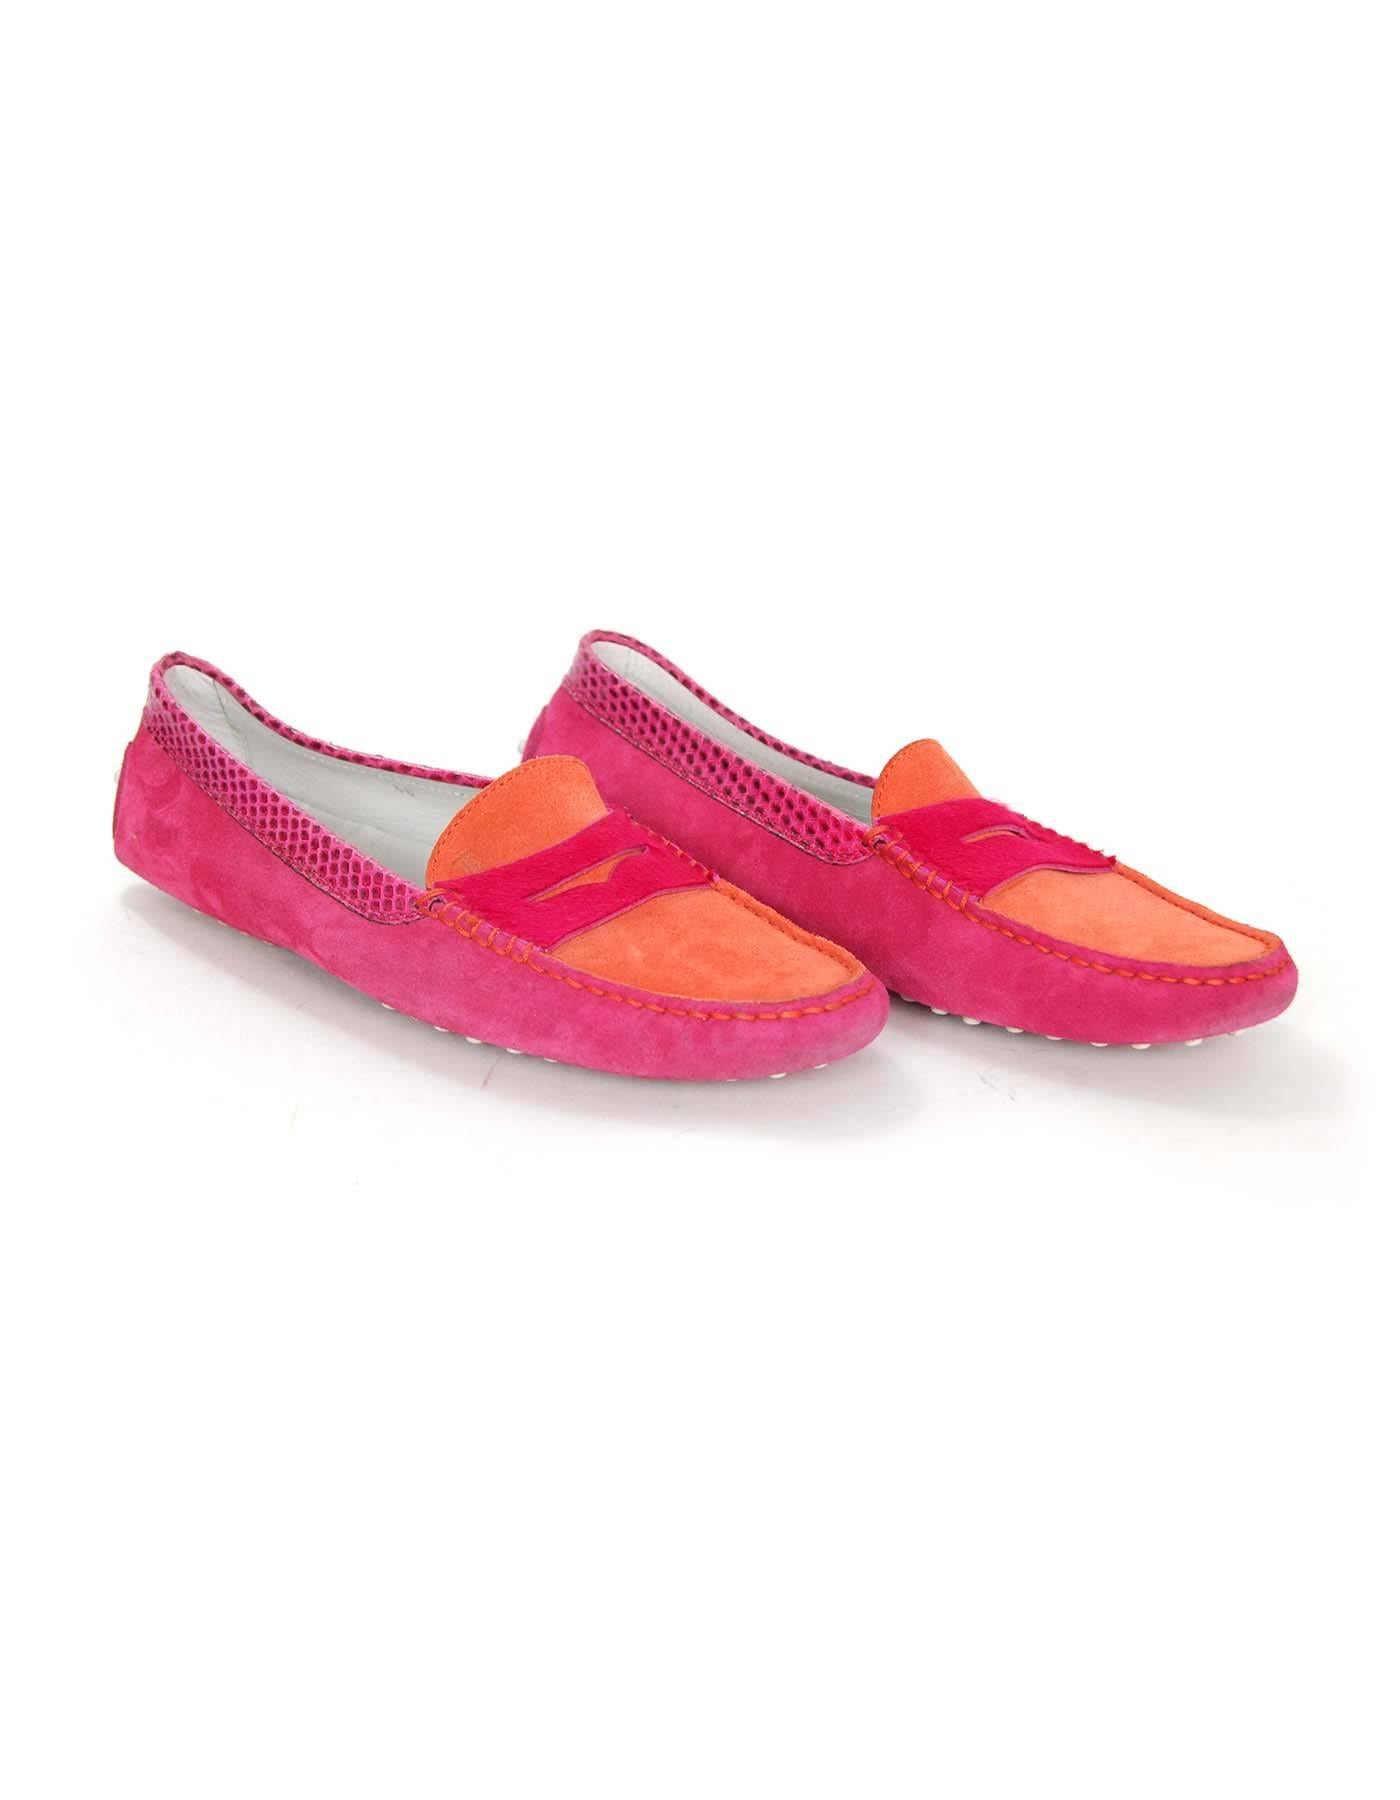 Women's Tod's Pink and Orange Suede Driving Loafers Sz 40